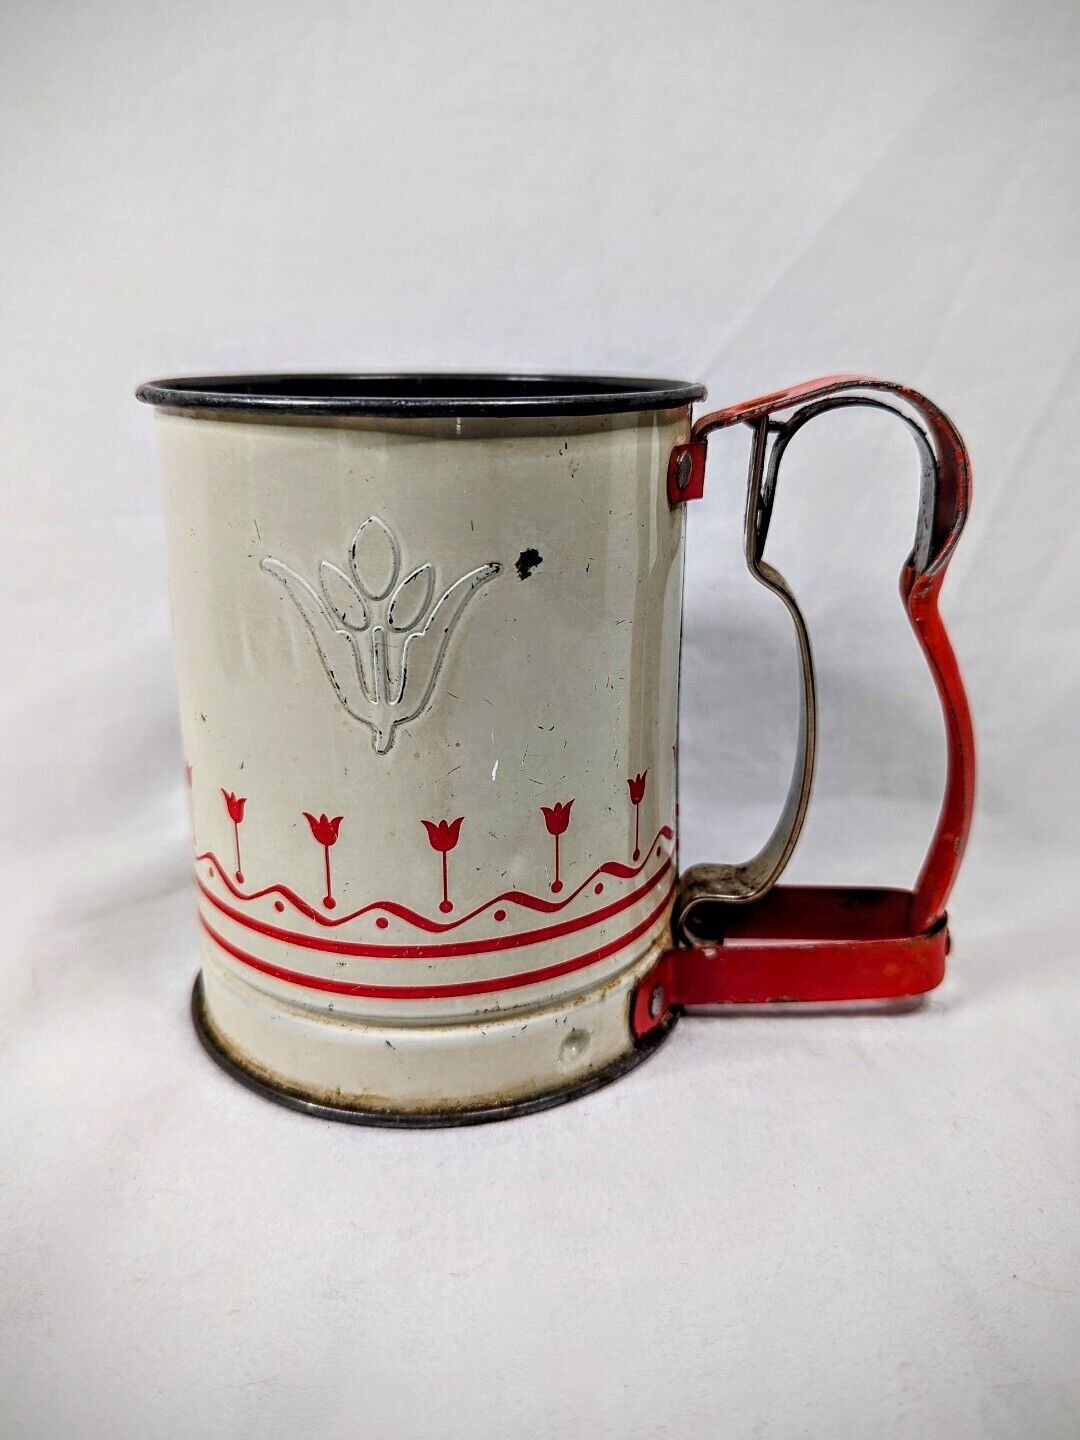 Vintage Sifter Androck Baking Handi-Sift Jr. Red White Tulip Tin Country Kitchen